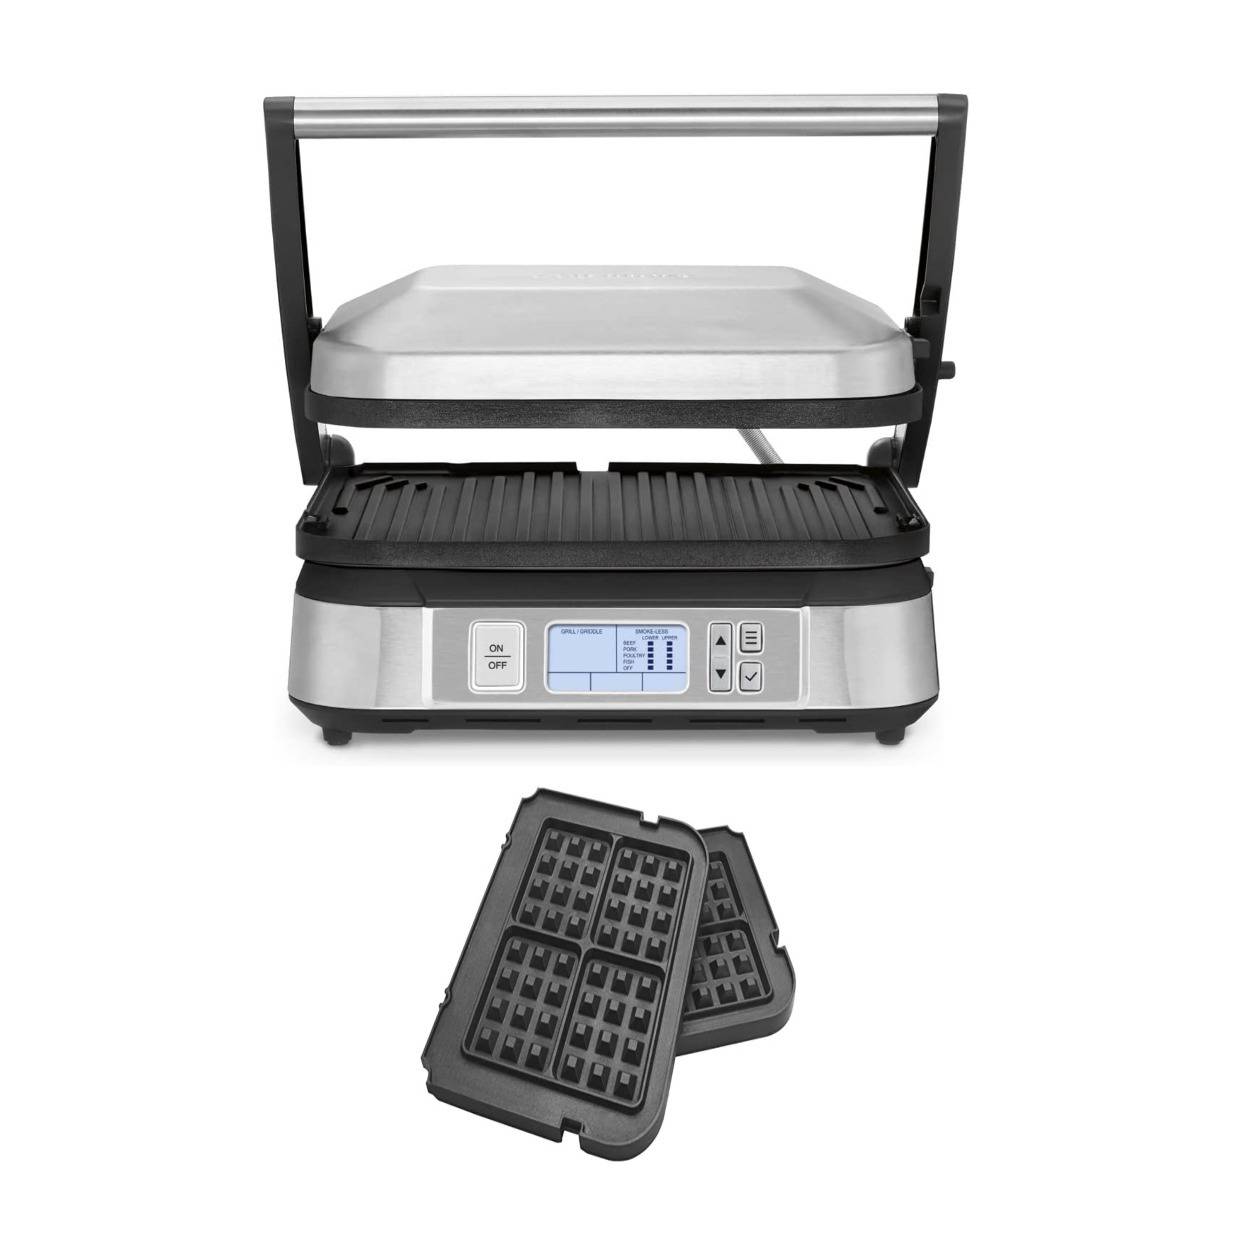 Cuisinart GR-6S Stainless Steel Griddler with Smoke-less Mode and Waffle Plates